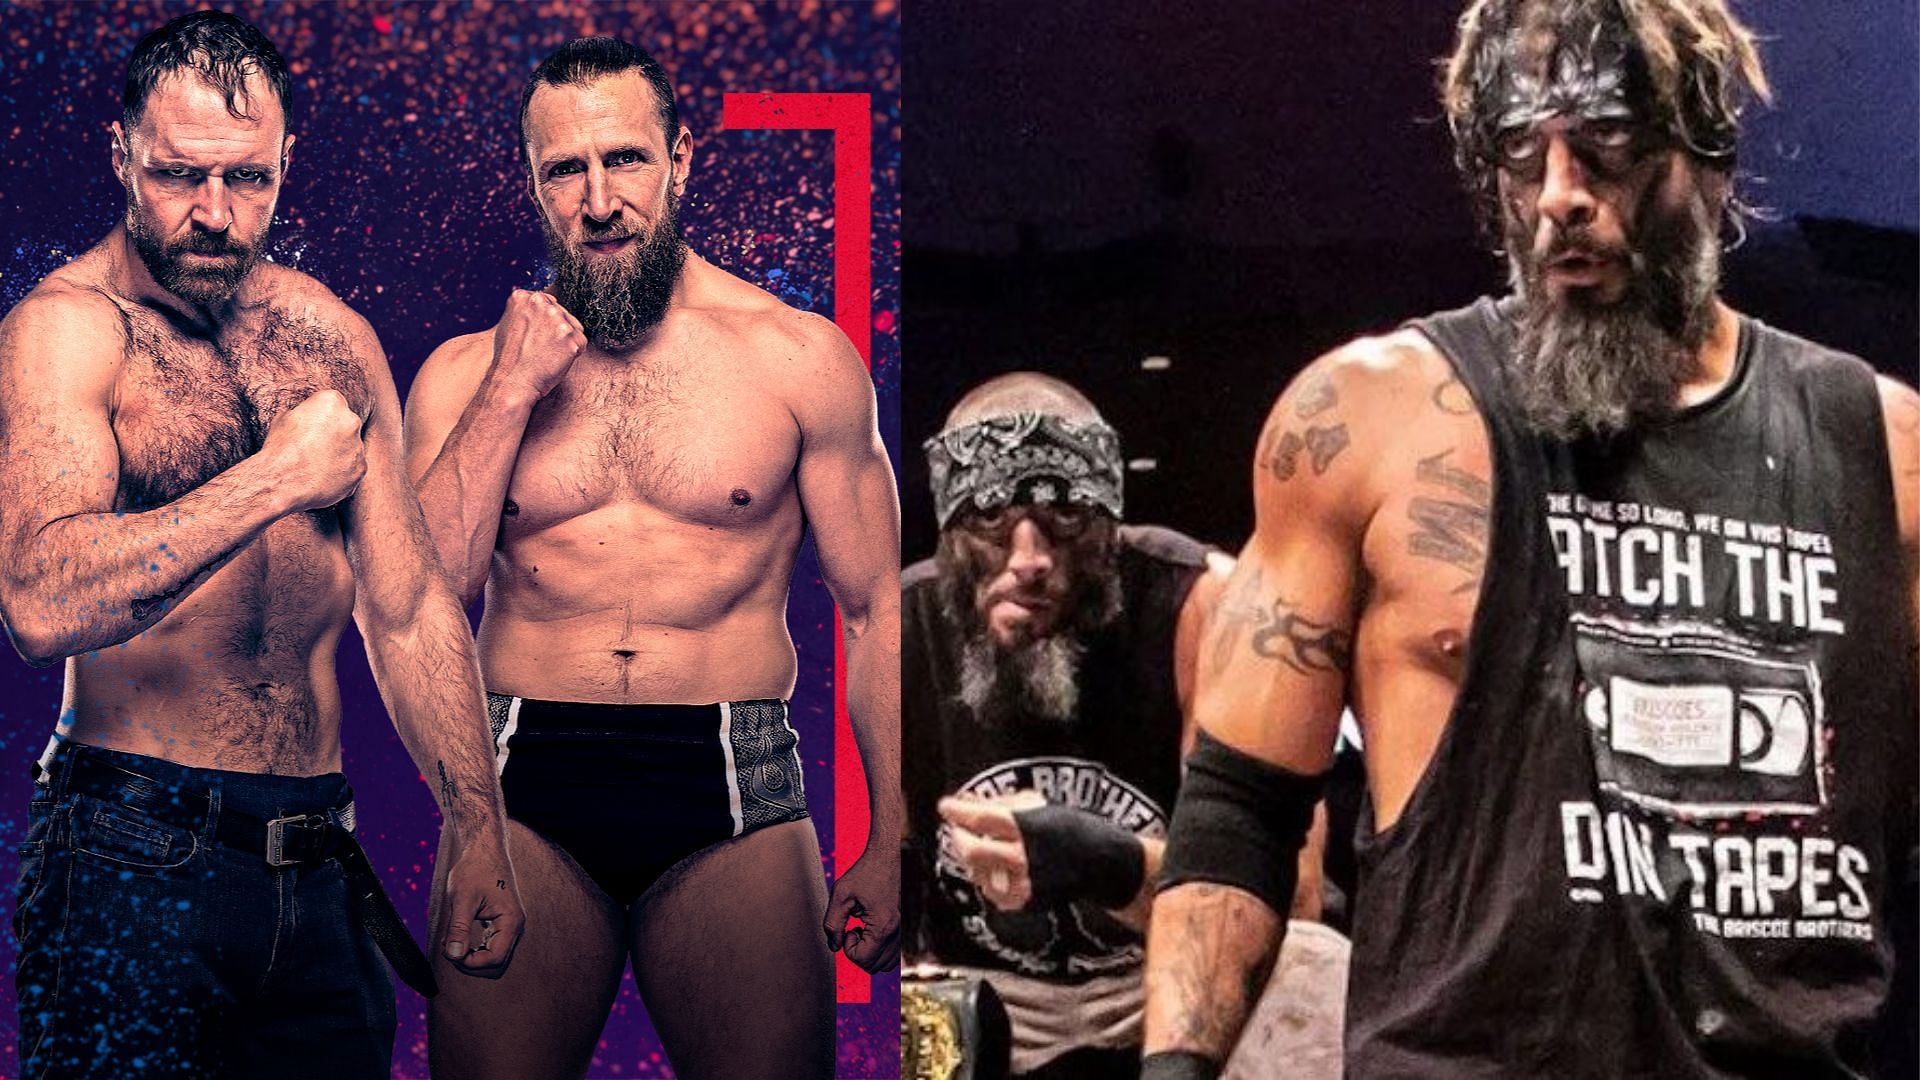 Which AEW and ROH dream matches would you like to see?